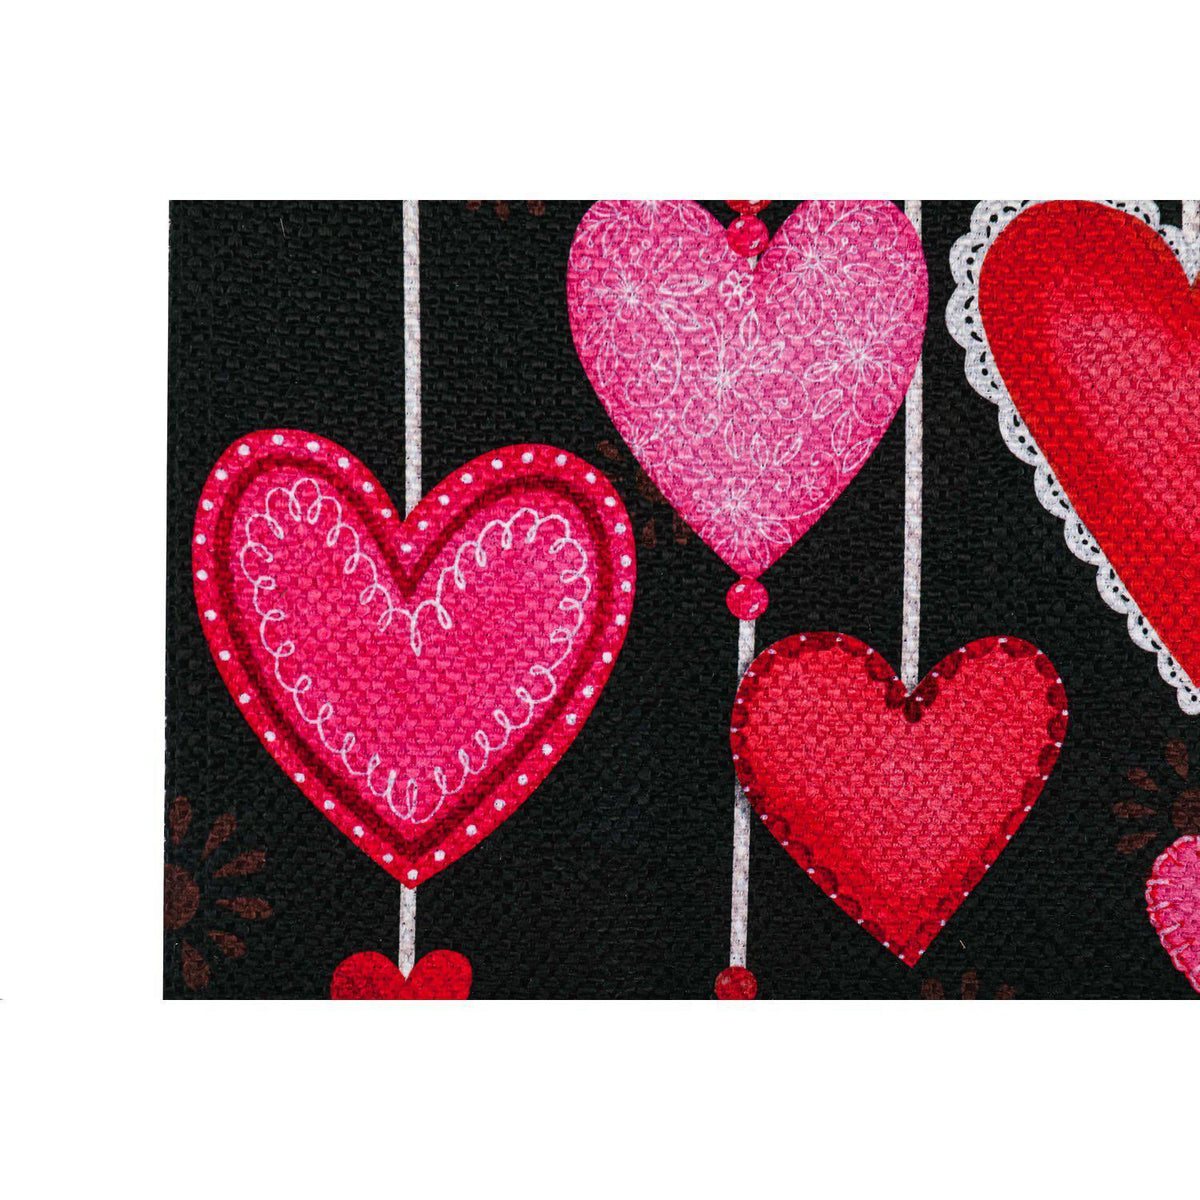 The Hanging Love Hearts house banner features pink, white, and red patterned hearts suspended over the word "Love". 